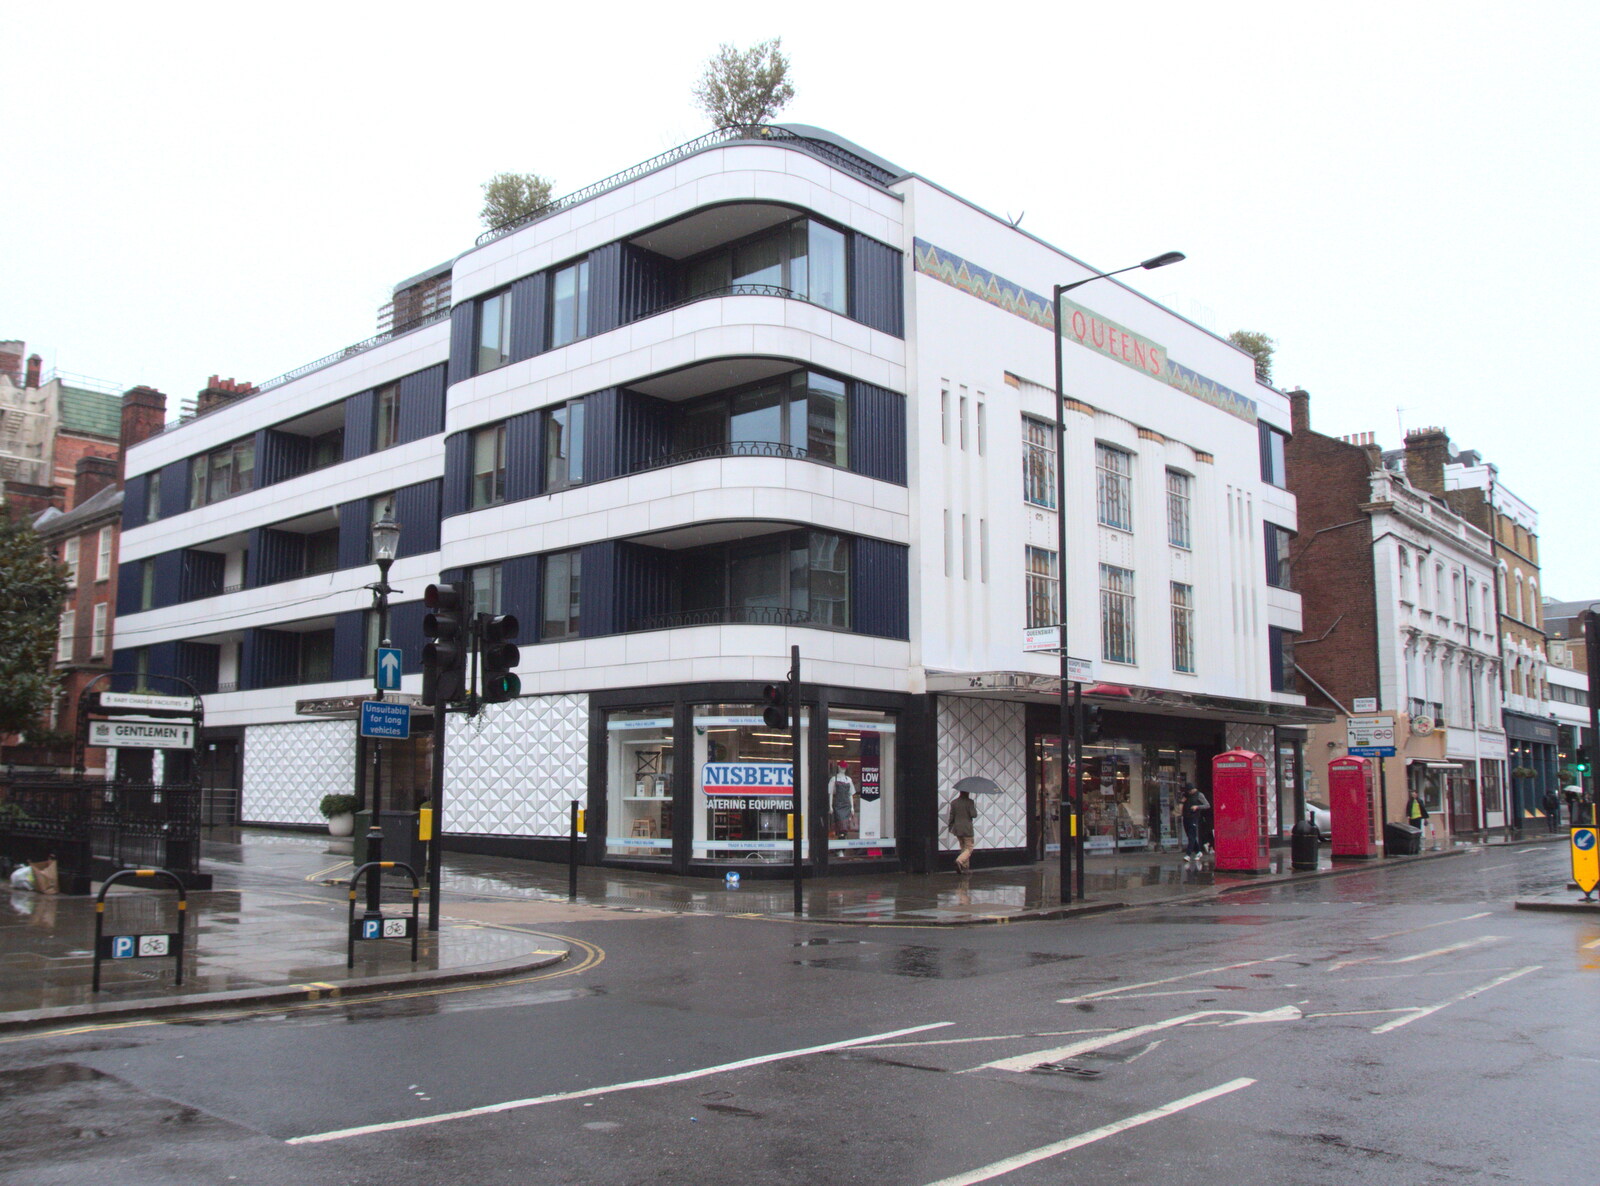 The 1930s Queens building on Westbourne Grove from Sunday Lunch and a SwiftKey Trip to Nando's, Thornham and Bayswater - 22nd February 2020